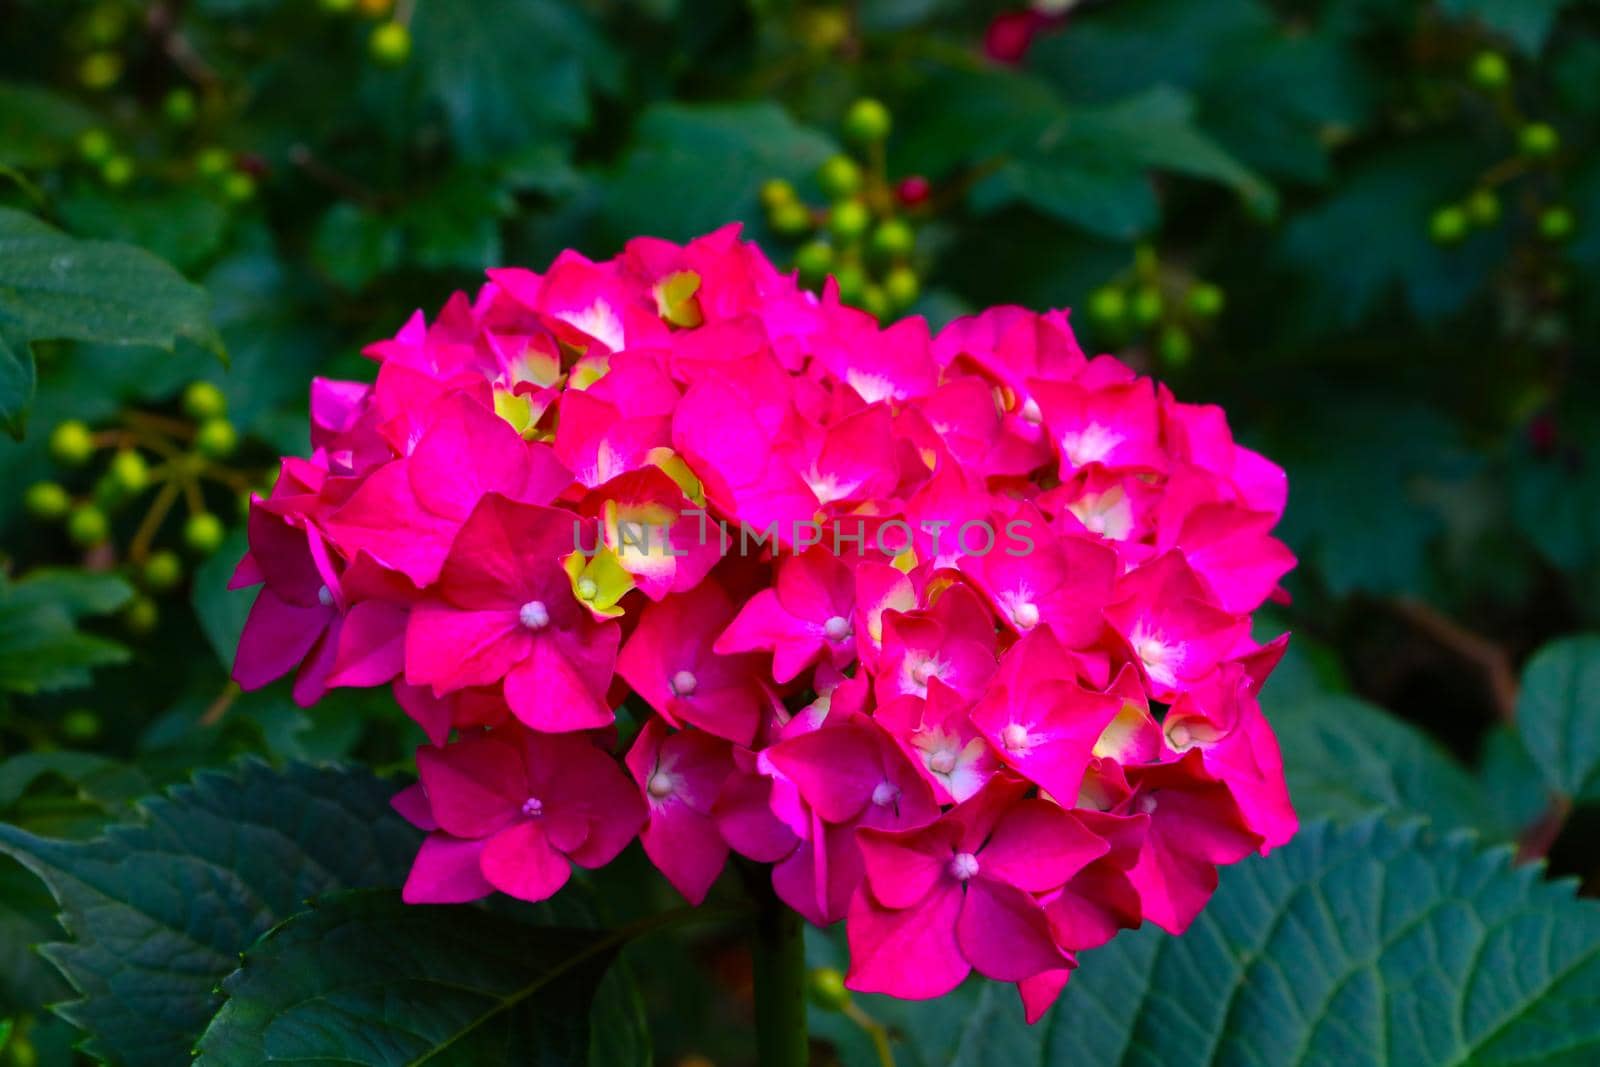 A bright flowering branch of hydrangeas in the garden in the spring